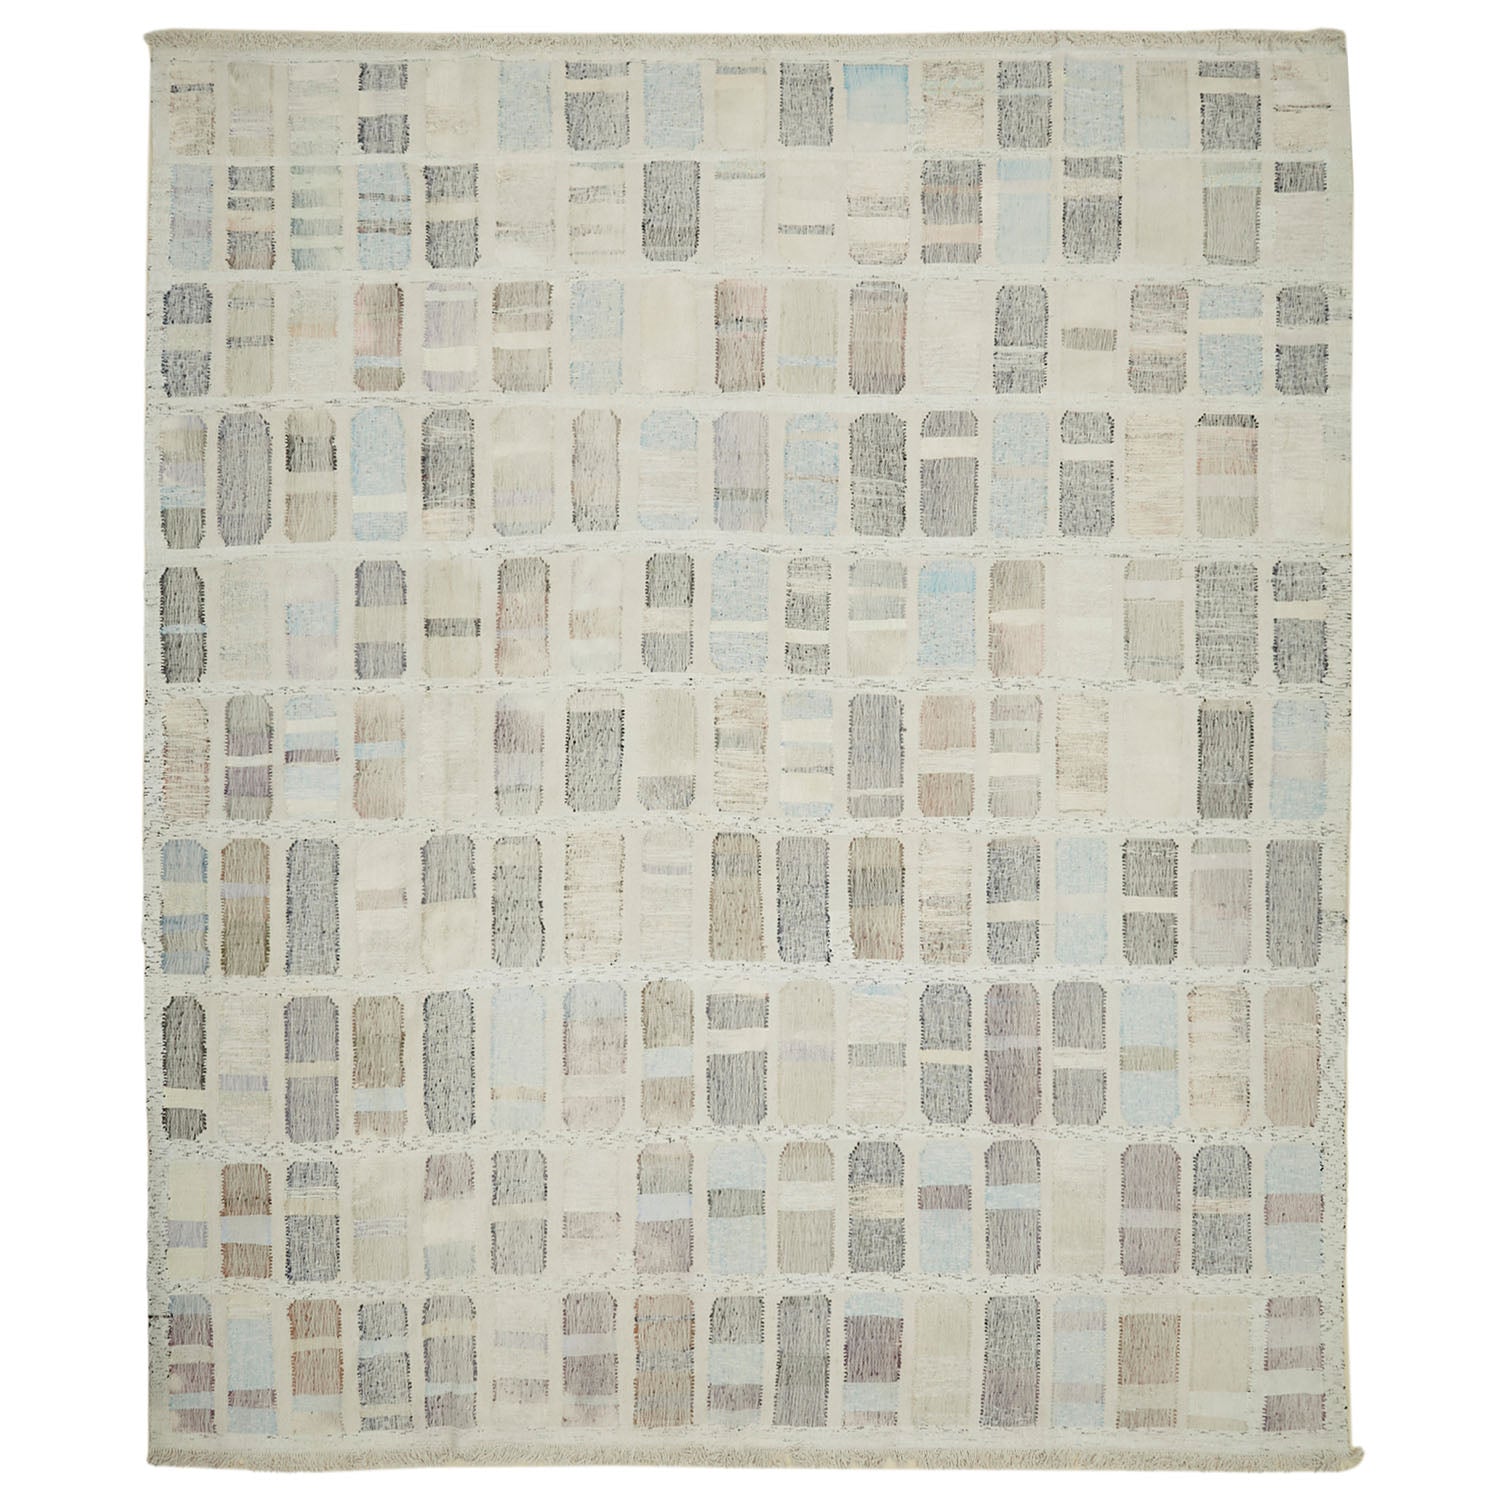 Contemporary rug with geometric pattern in neutral and pastel shades.